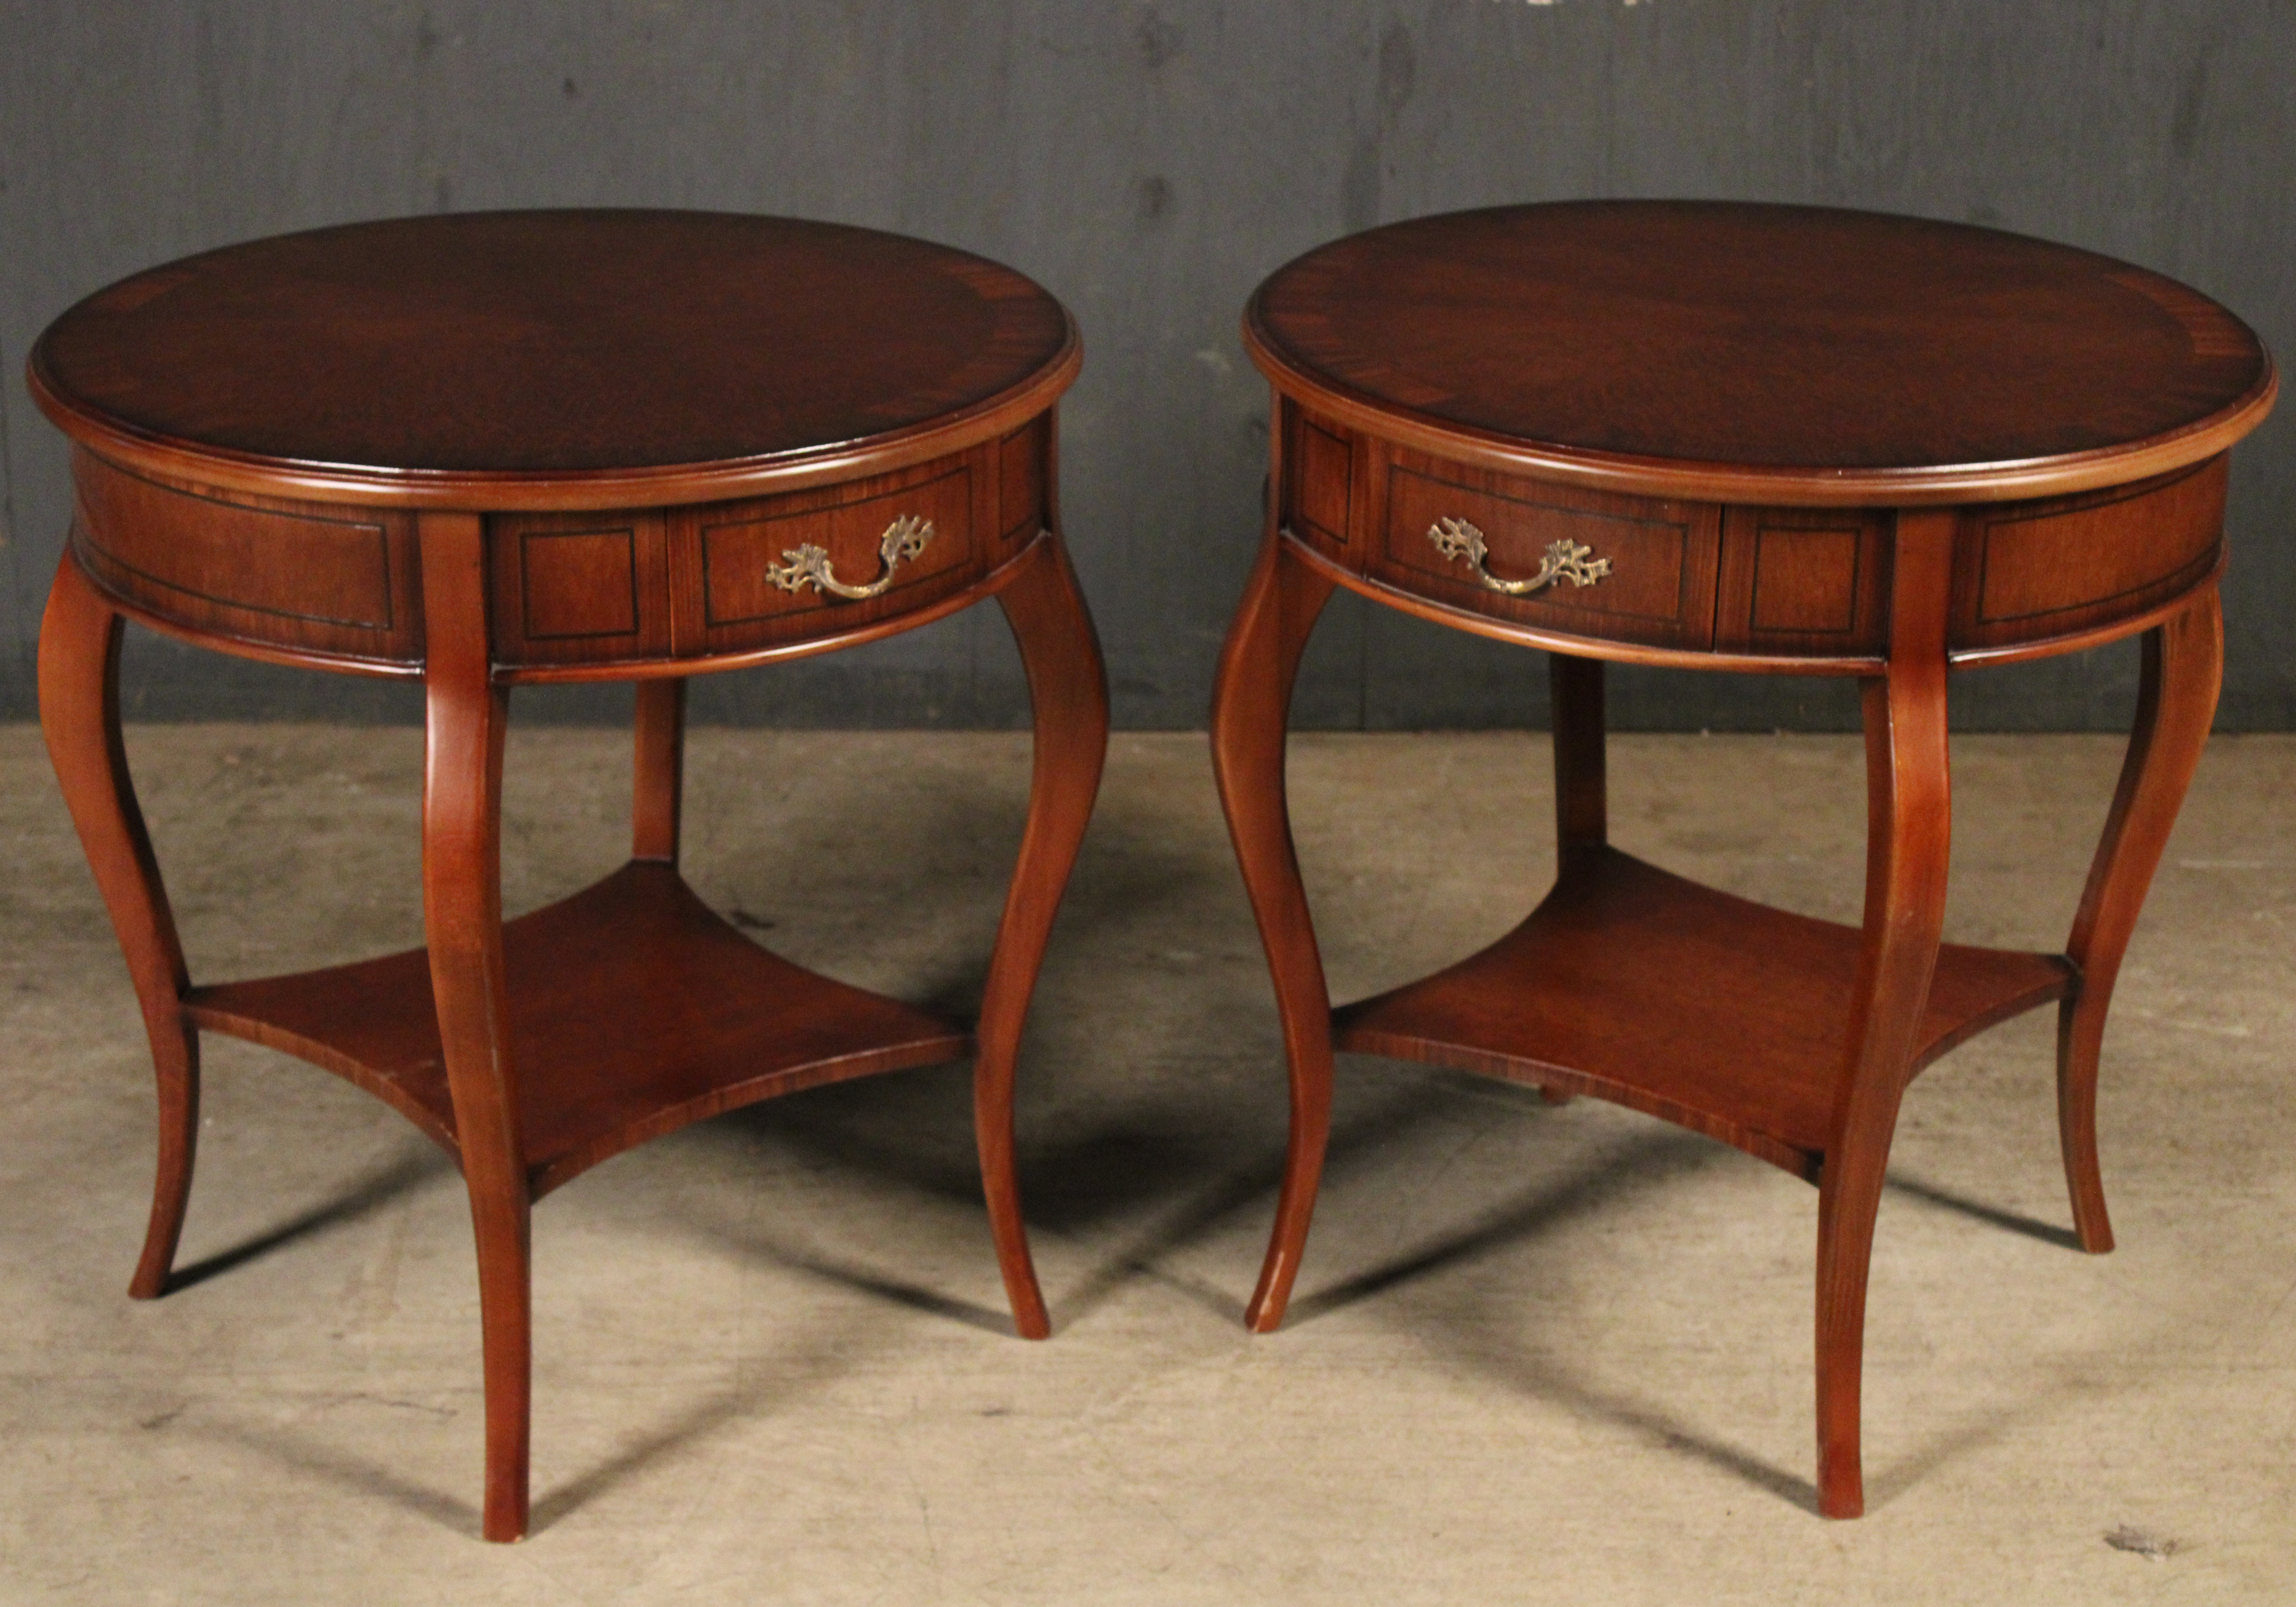 PAIR OF OCCASIONAL TABLES PAIR